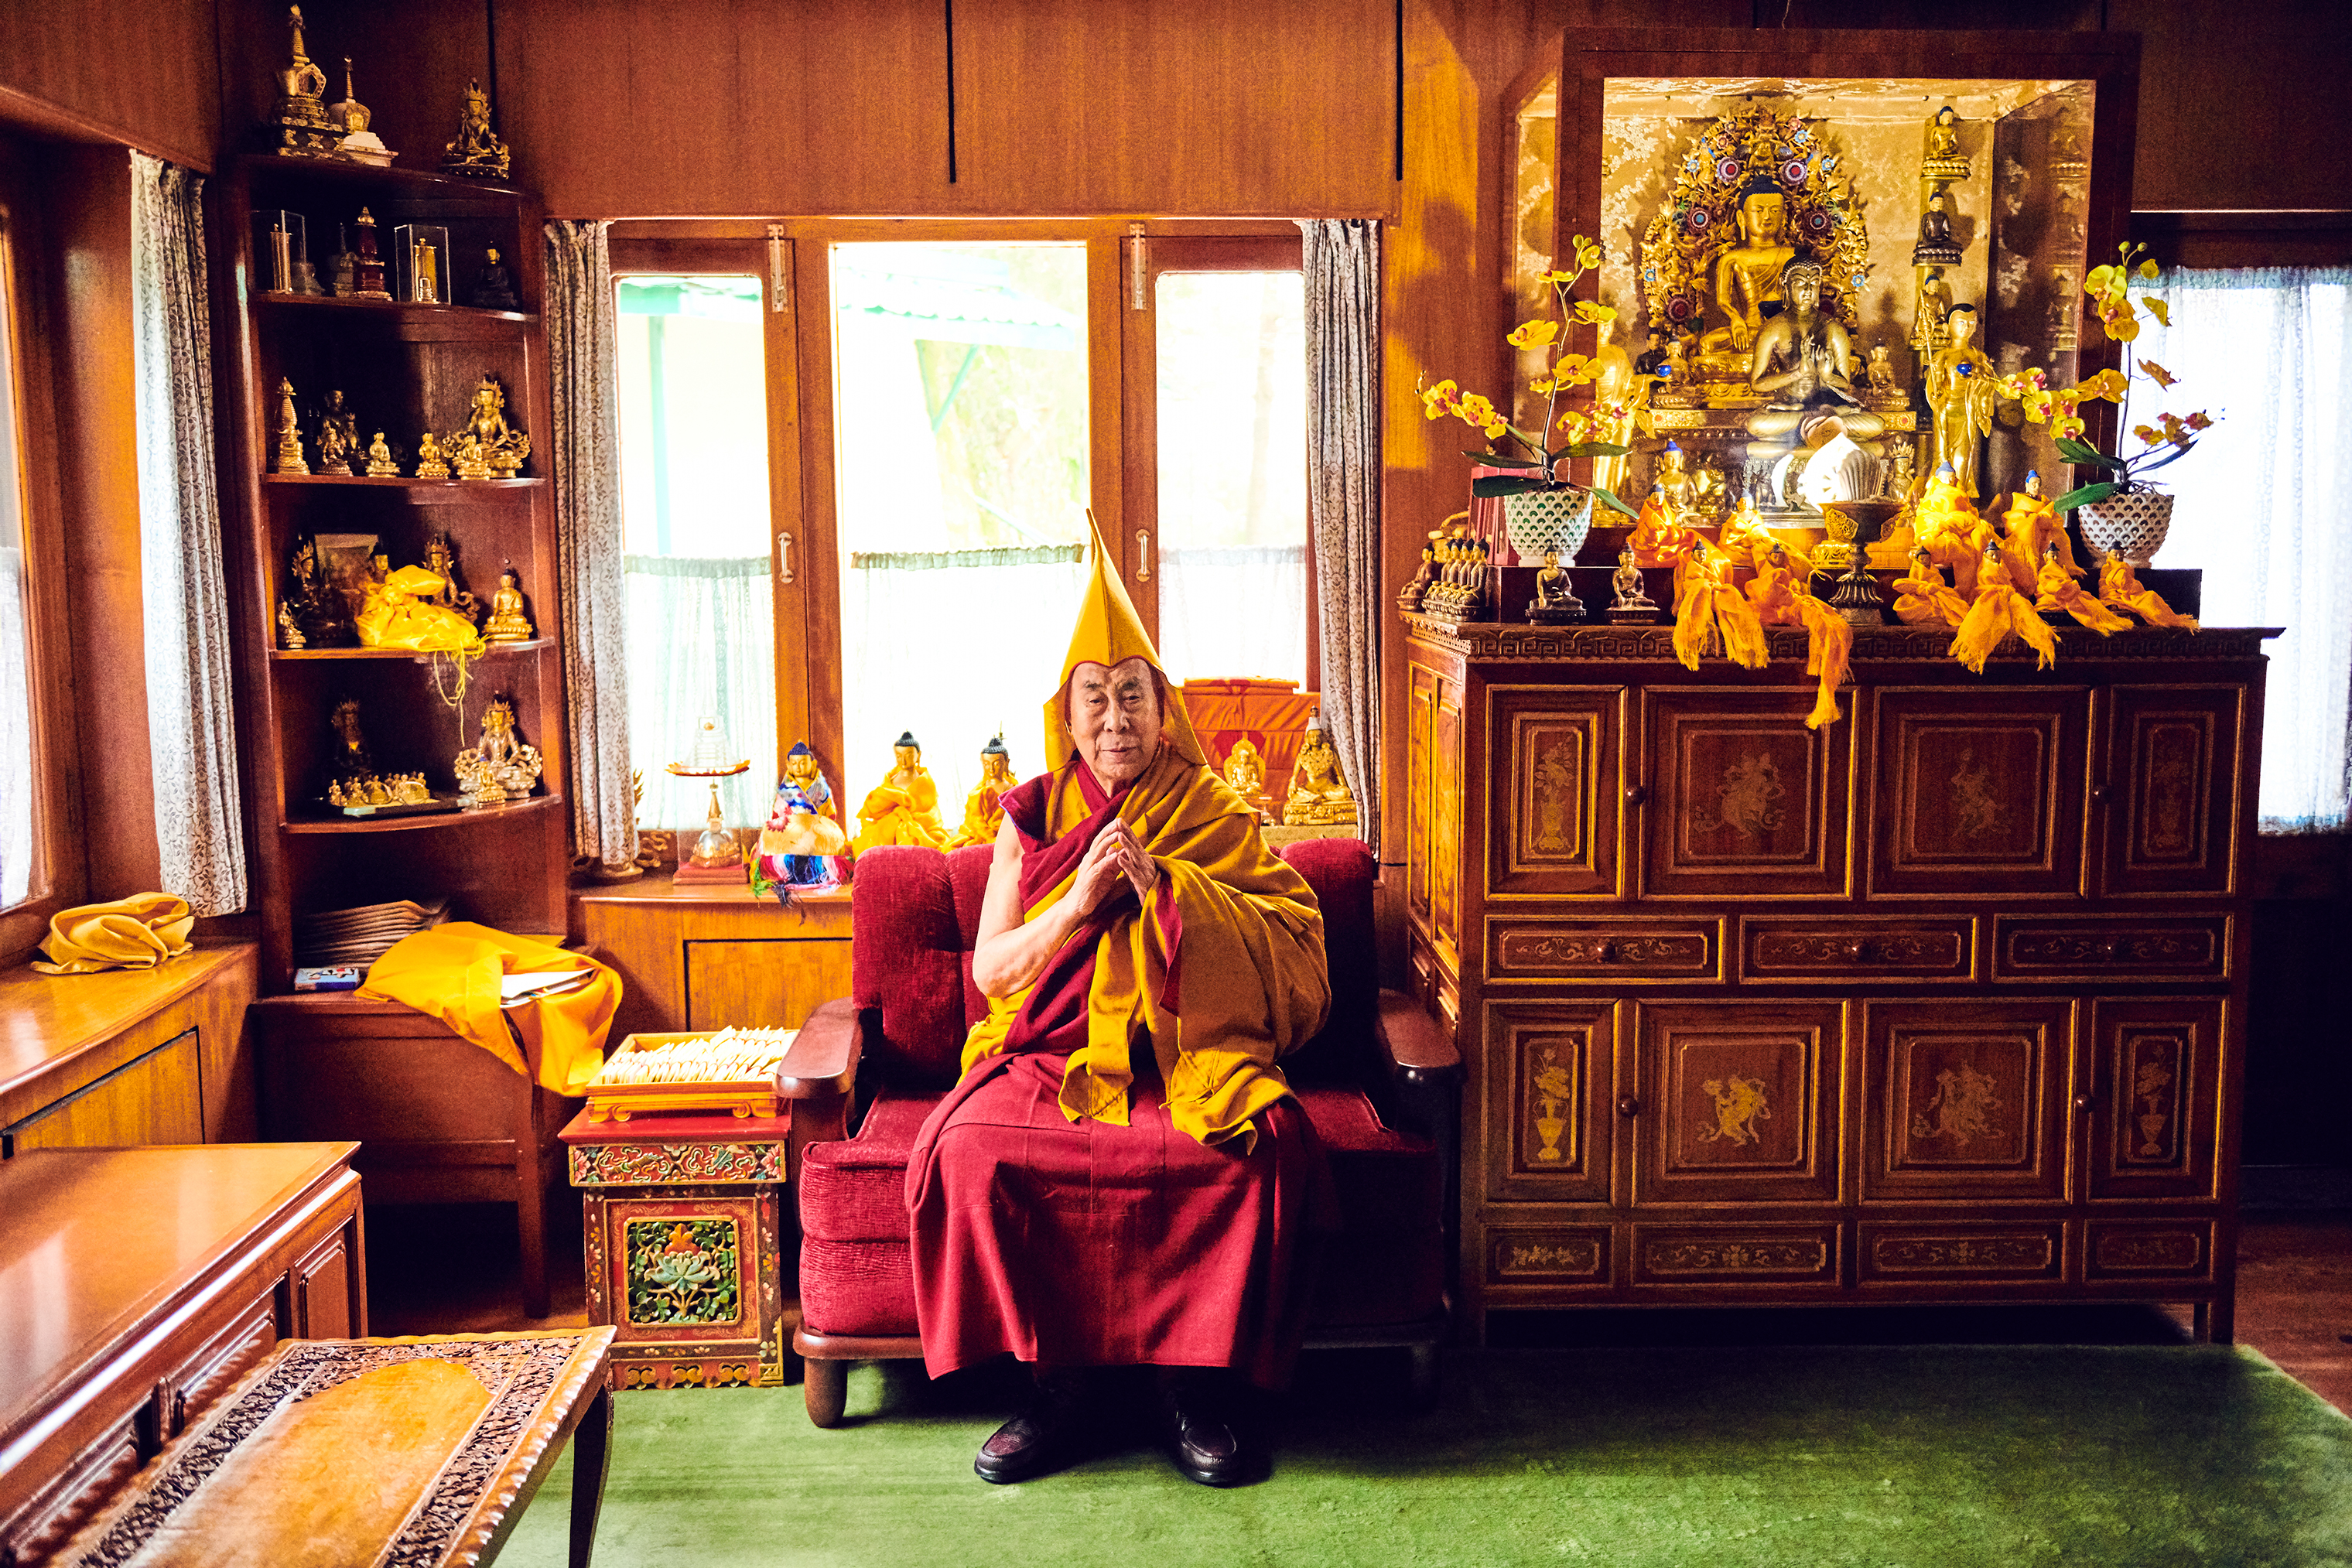 The Dalai Lama in Dharamsala in February. (Ruven Afanador for TIME)